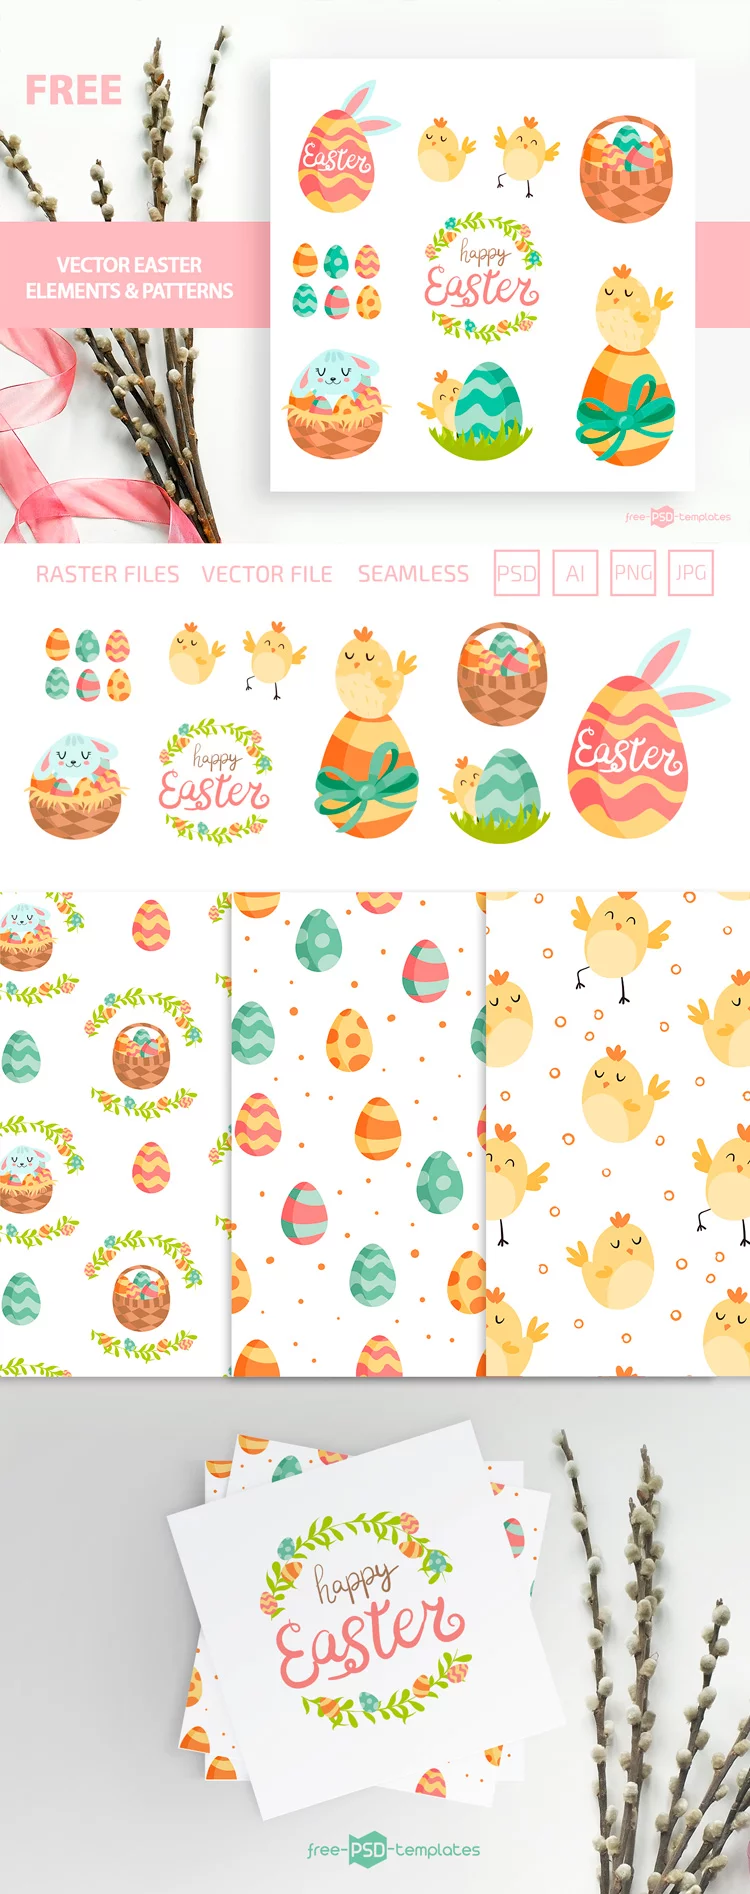 Free Vector Easter Elements & Patterns